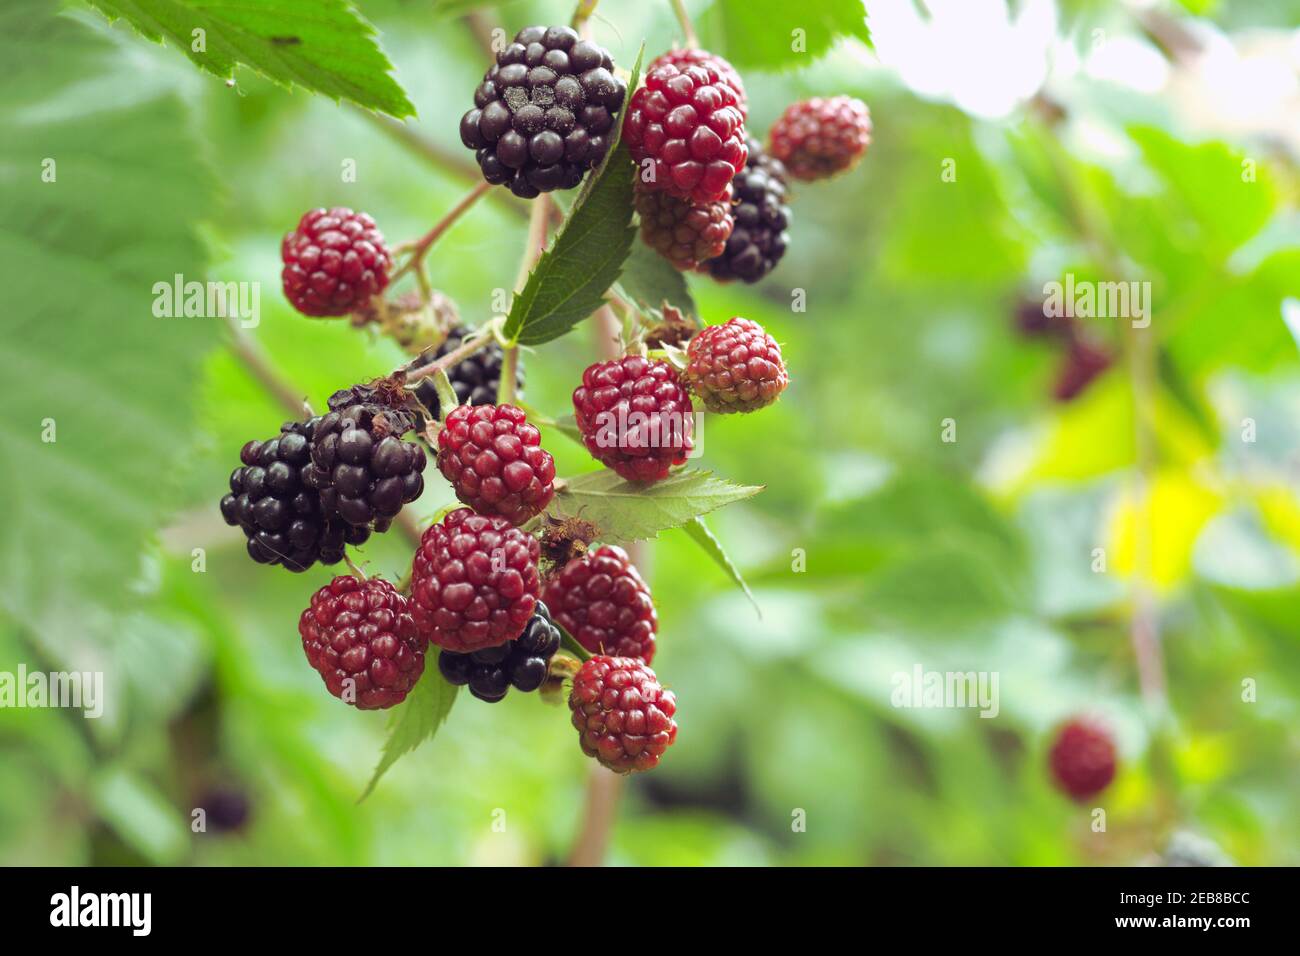 black raspberry berries of different degrees of ripeness. red and black berries on branchlets Stock Photo